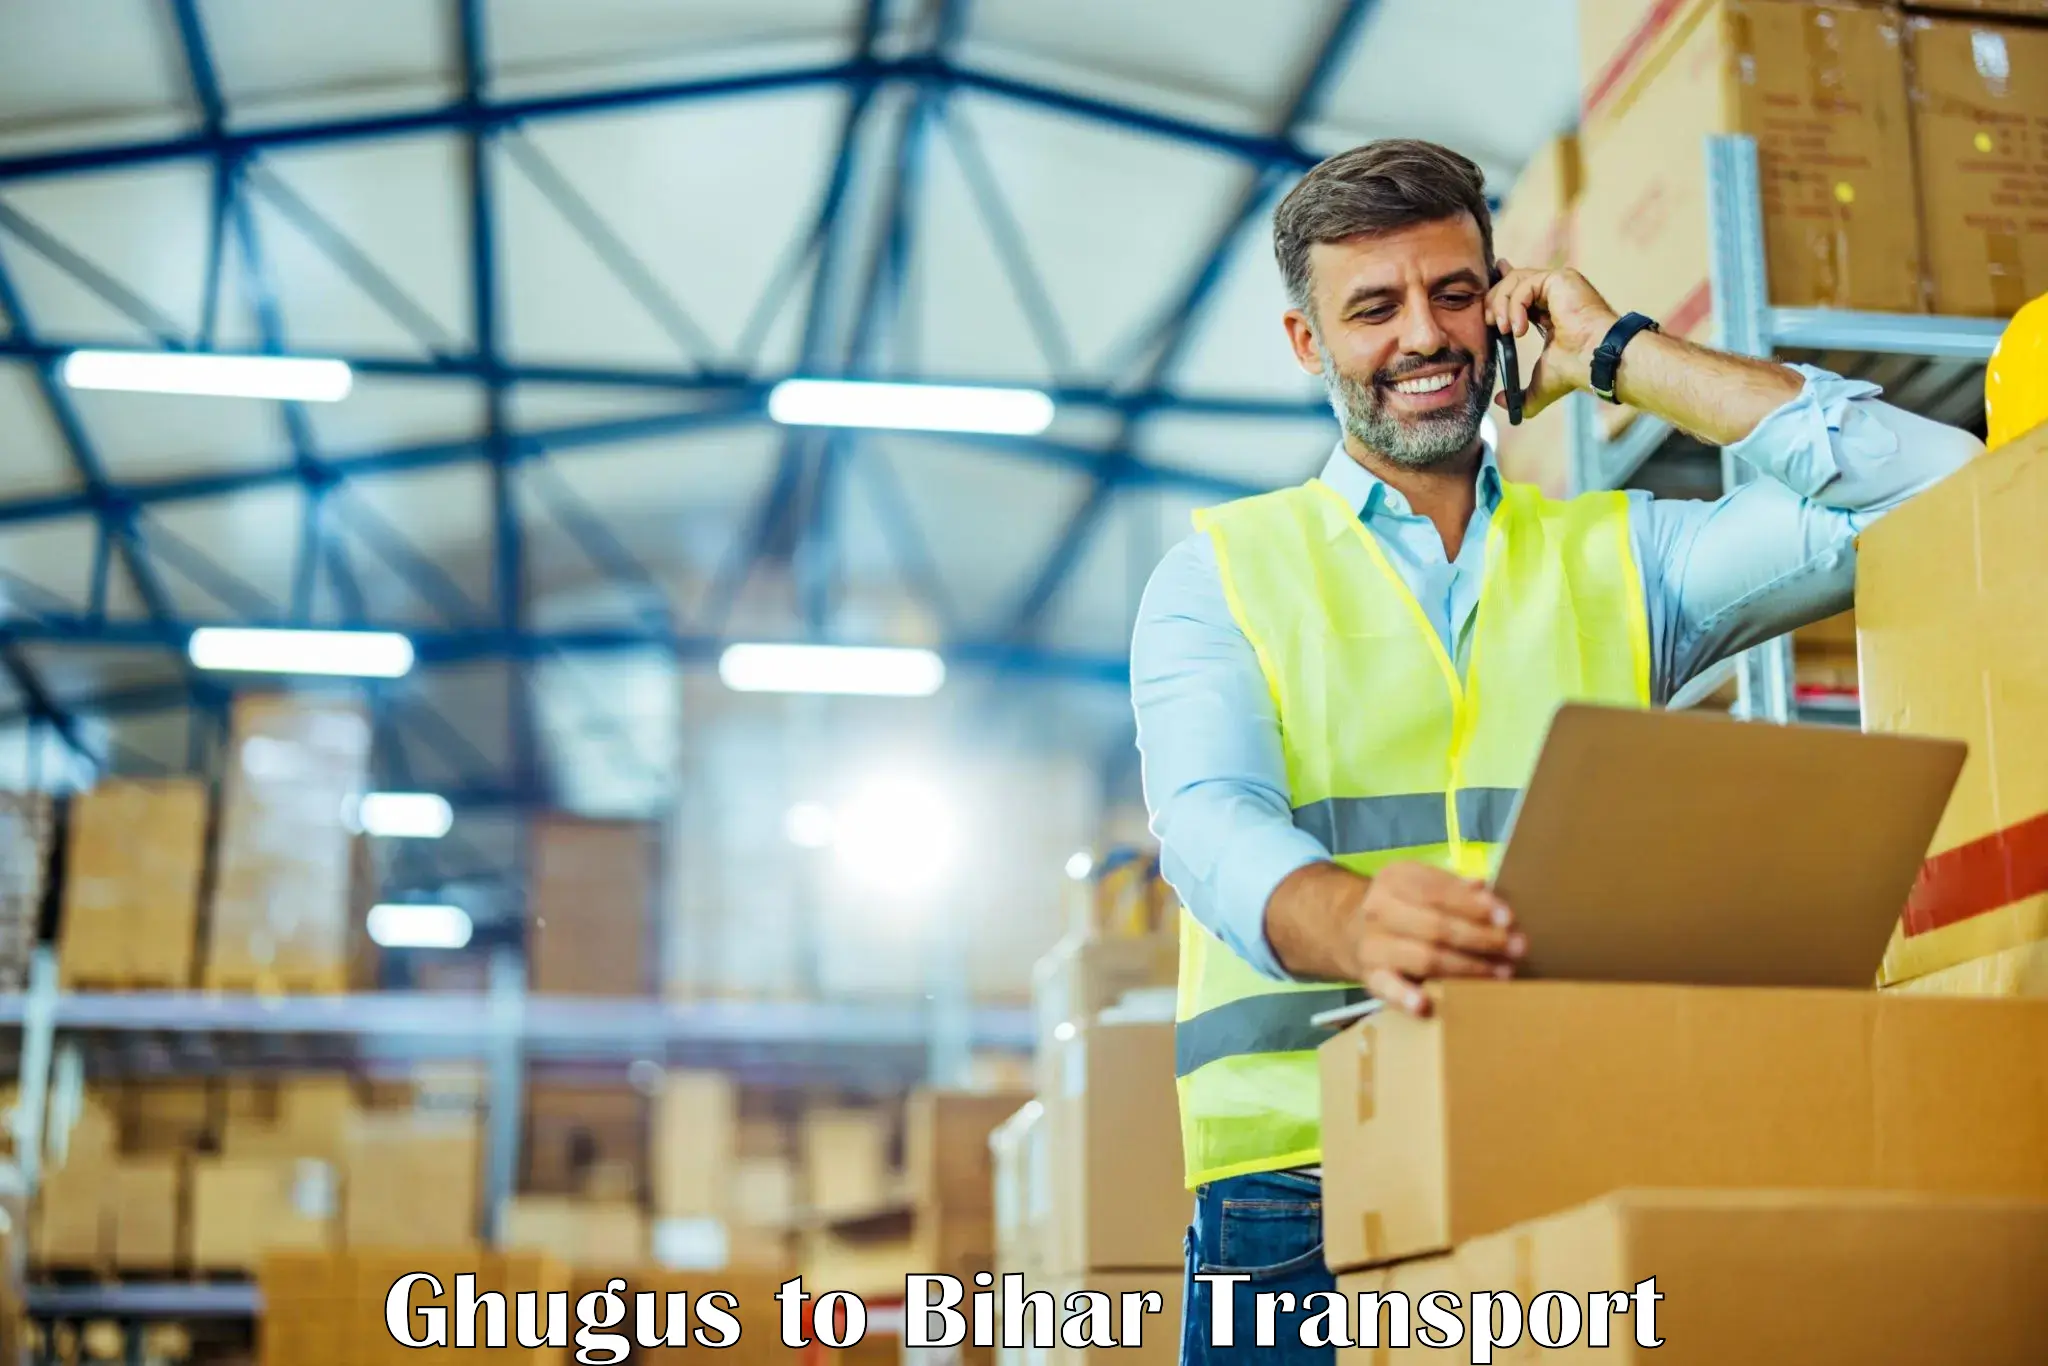 Nationwide transport services Ghugus to Bihar